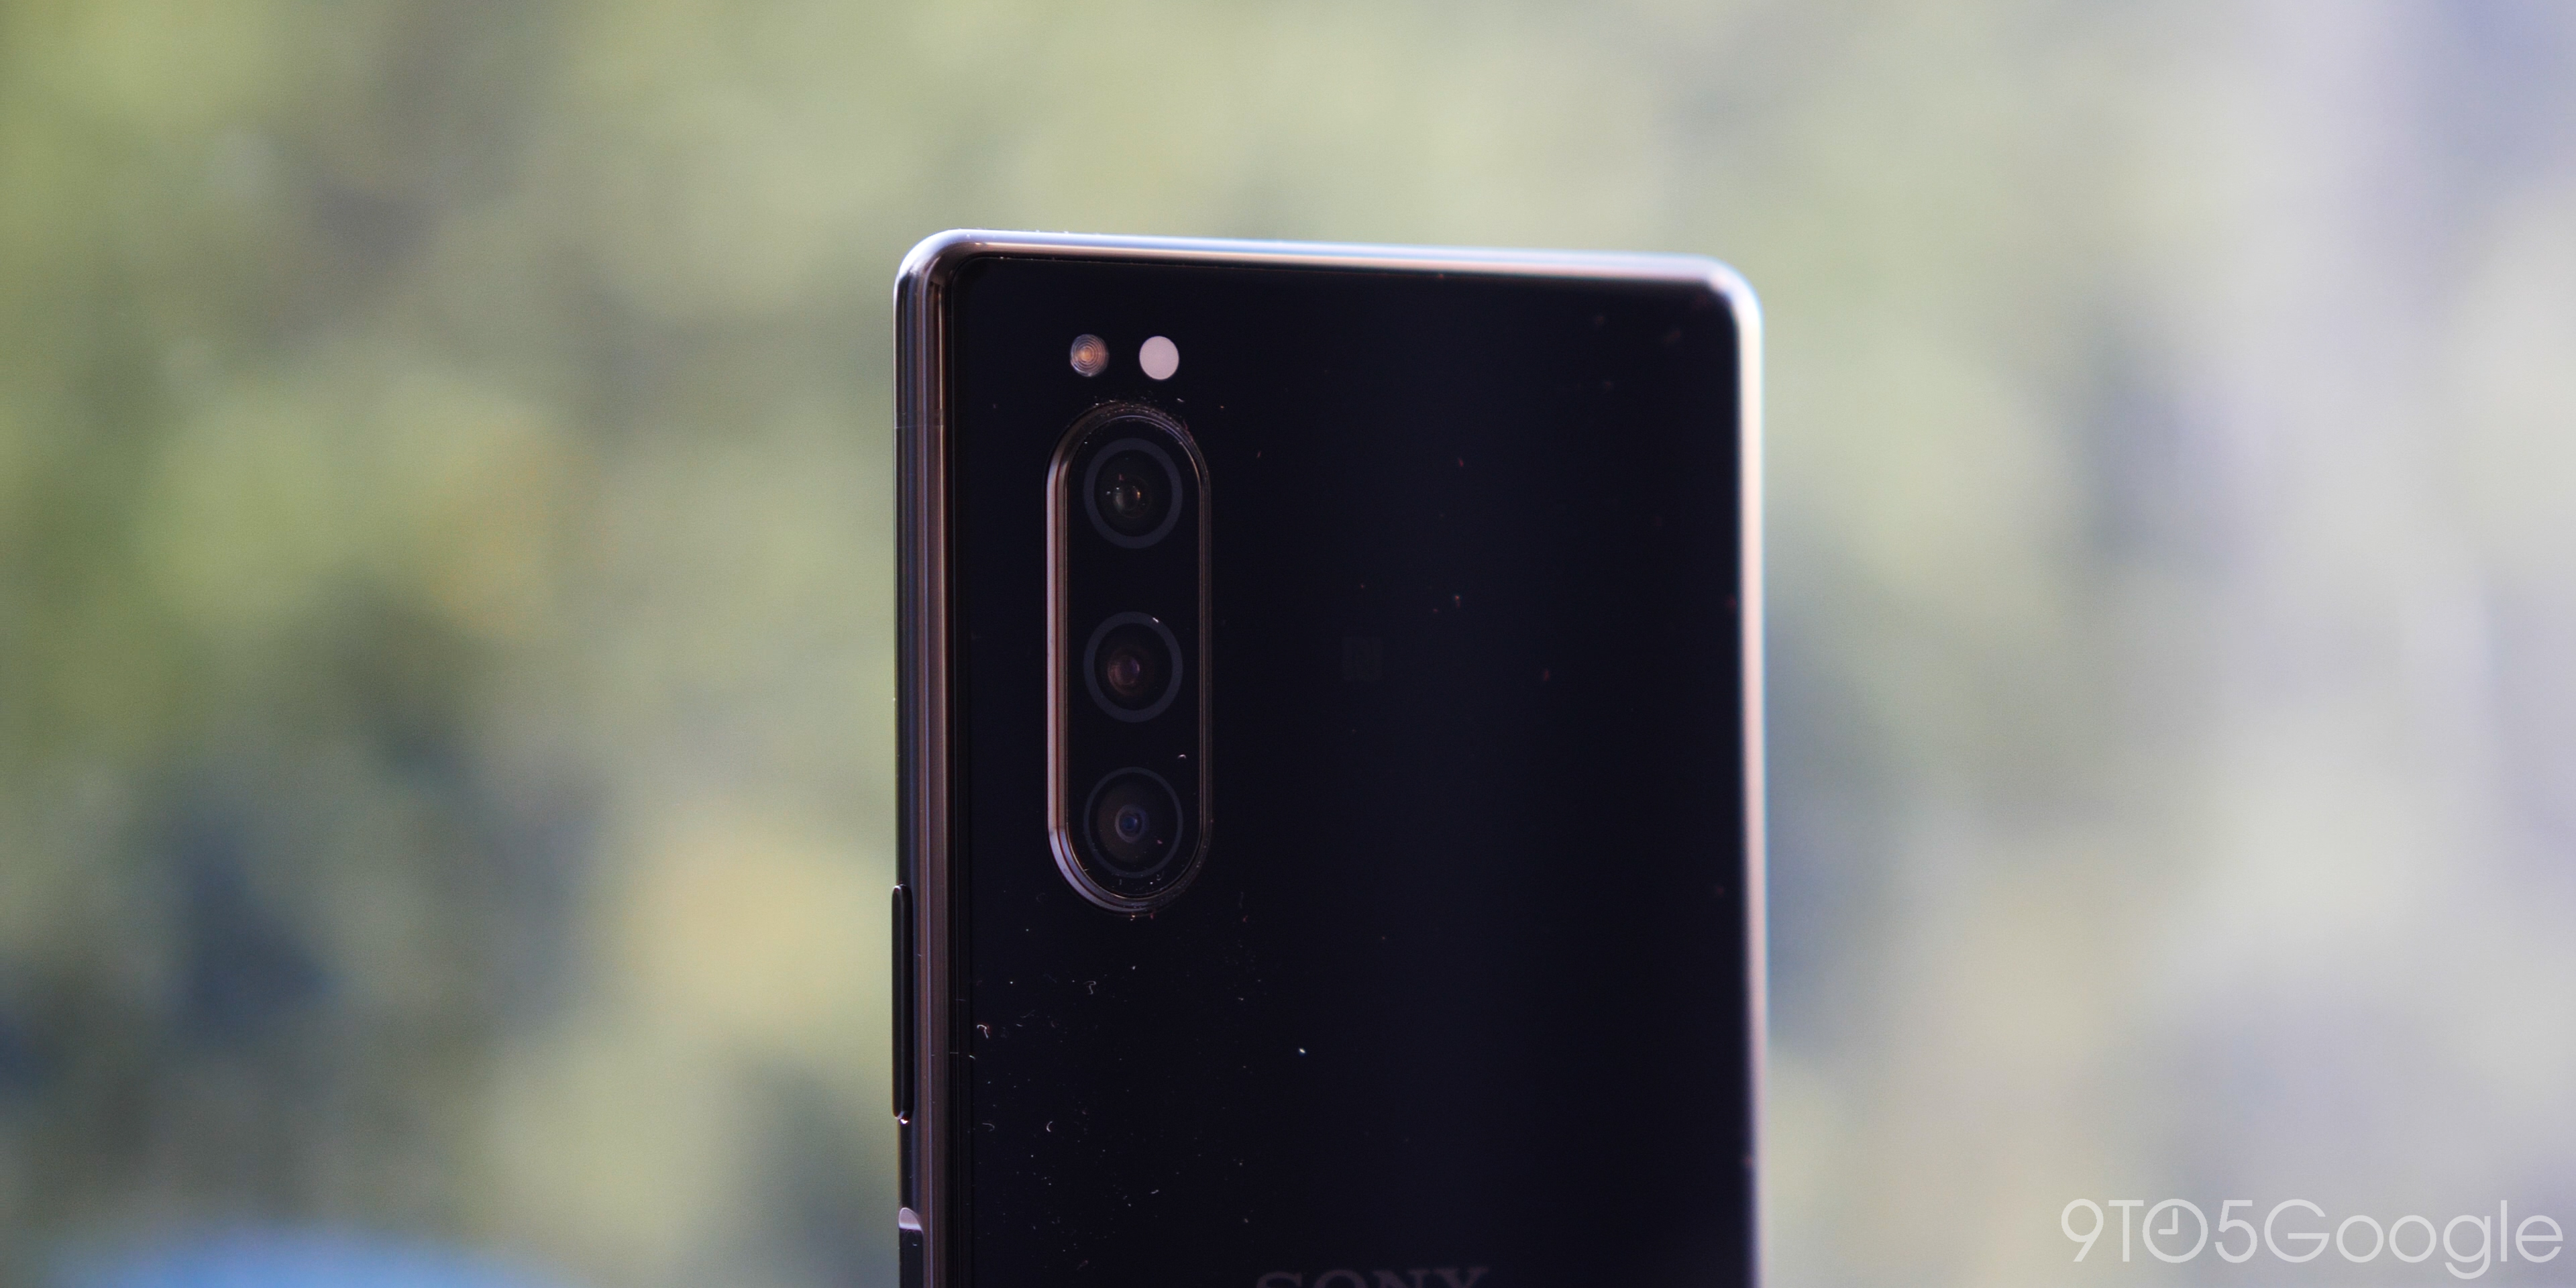 Sony Xperia 5: 'Smaller' but definitely compact [Video] - 9to5Google